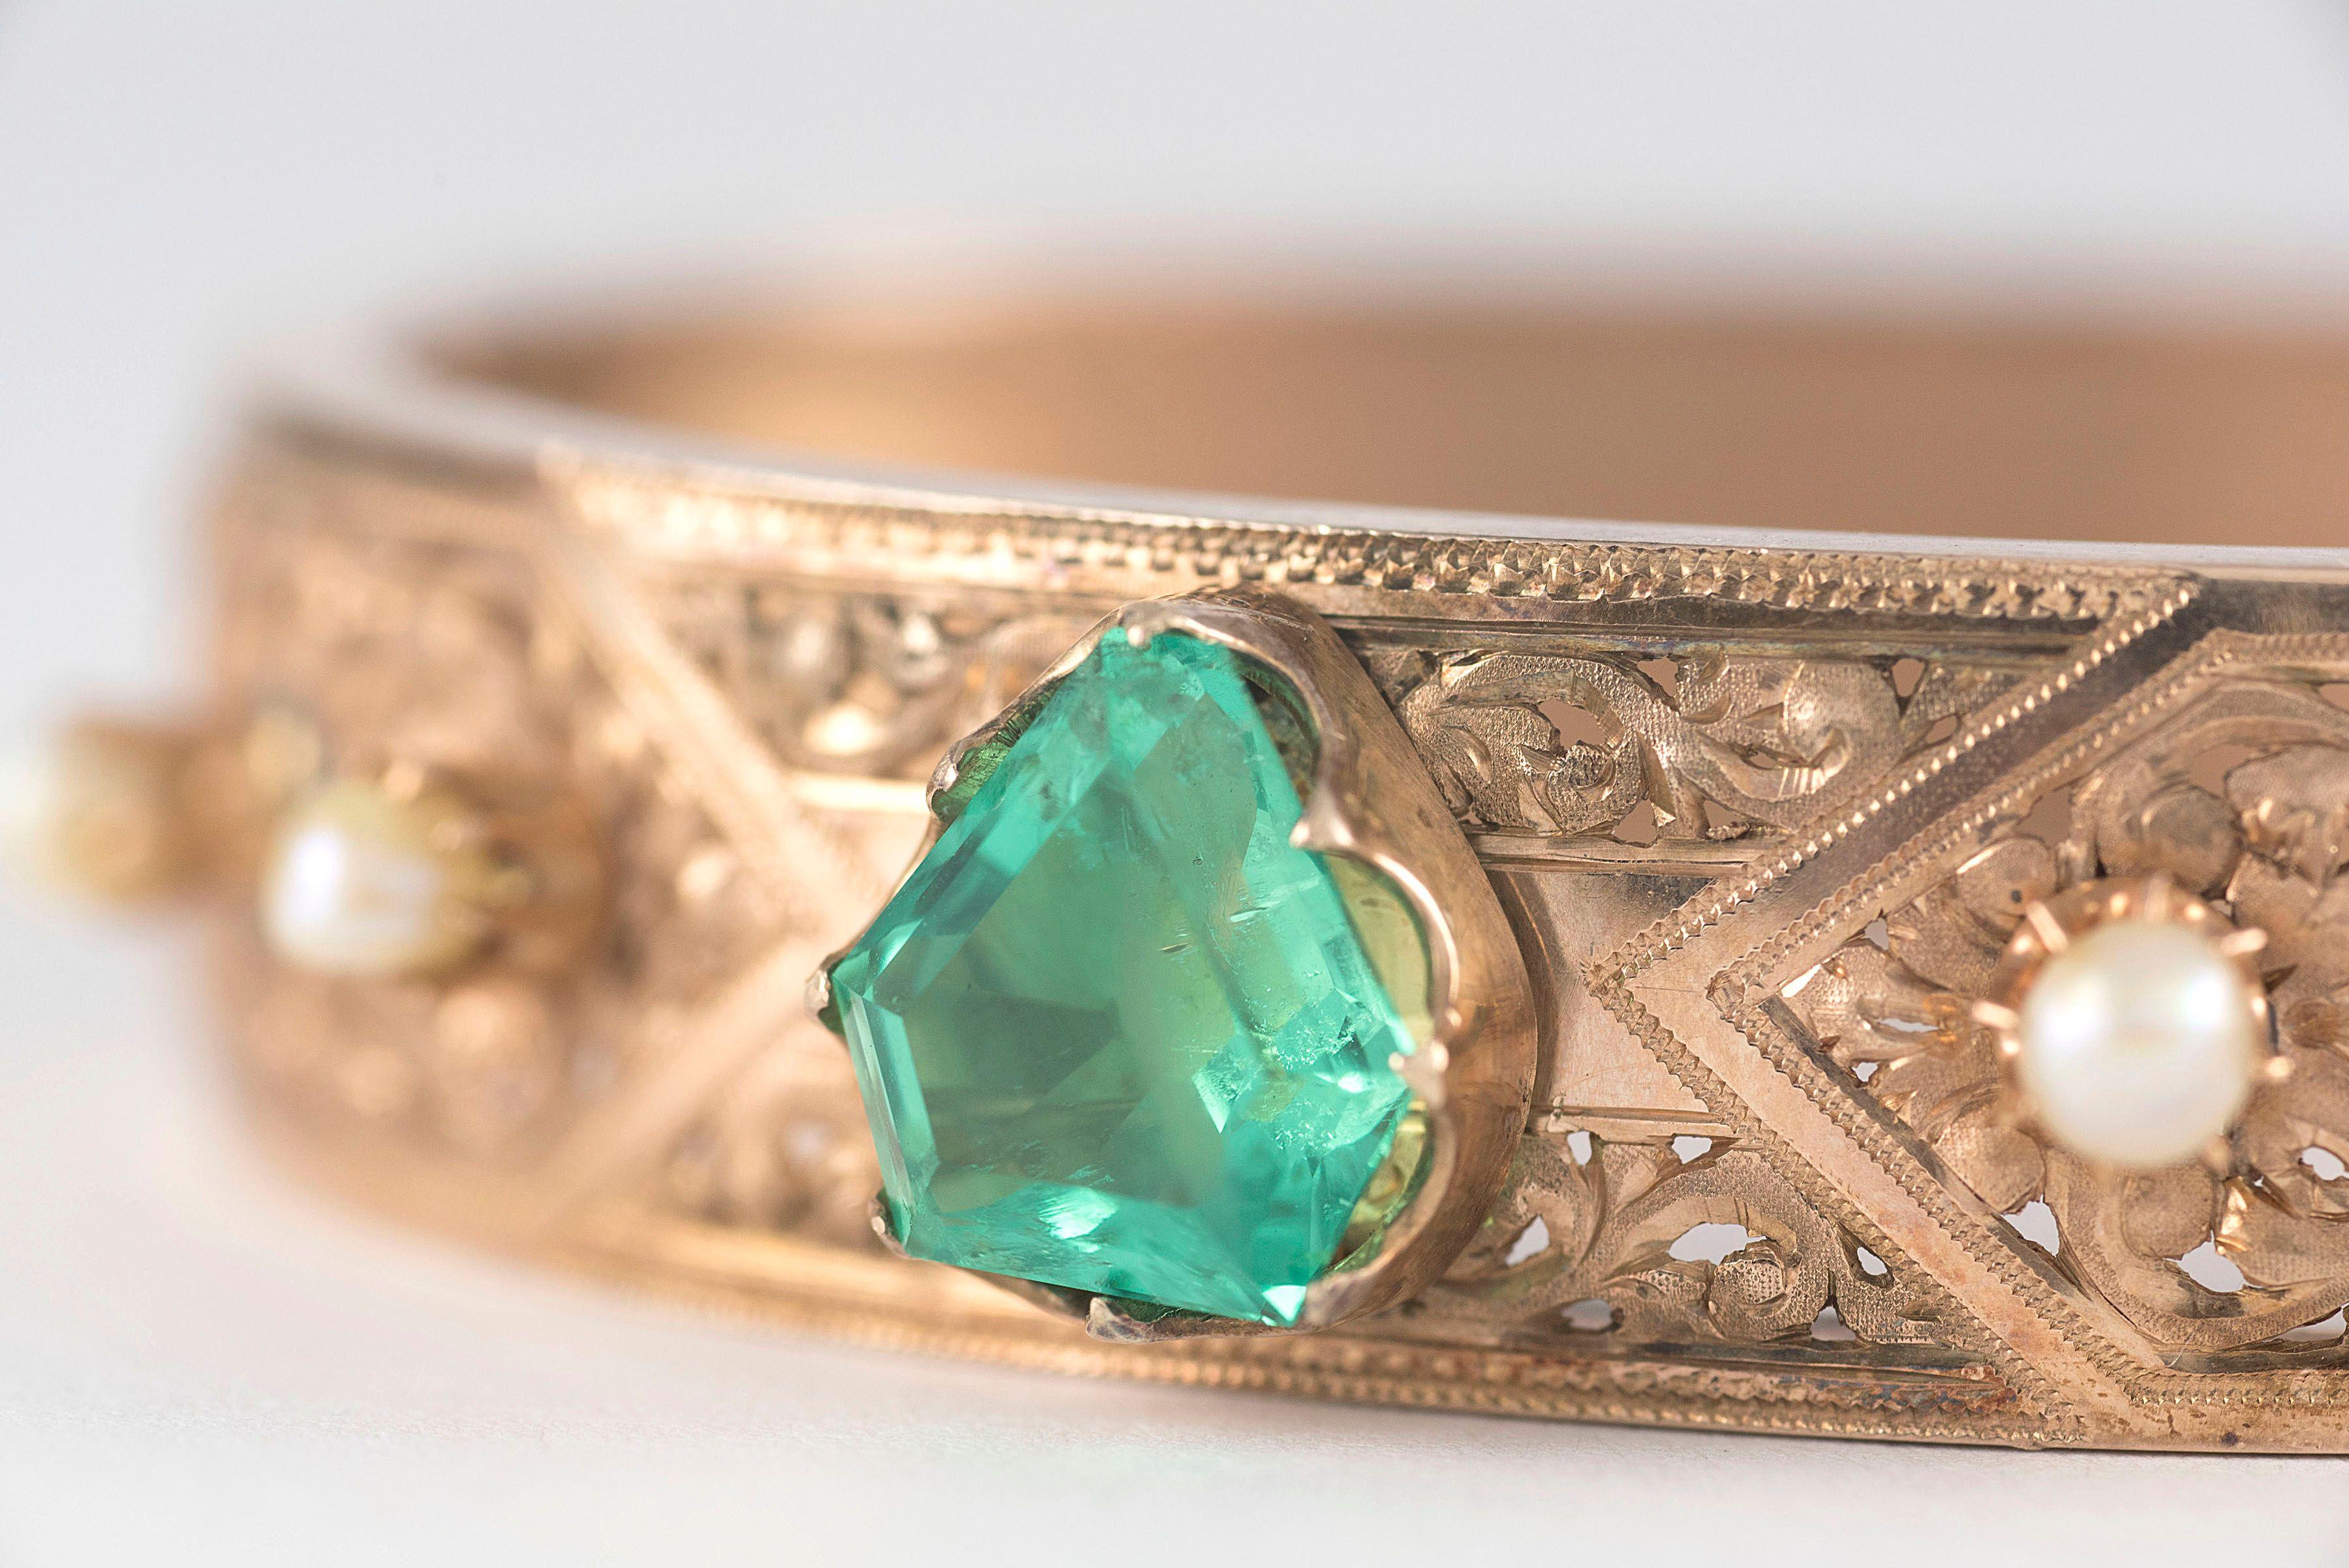 Crafted in 9kt rose gold, this antique Victorian bangle bracelet is designed around a natural unheated kite-cut Colombian emerald measuring 3.22 carats and surrounded by four natural white pearls and intricate decorative swirling piercing. 
